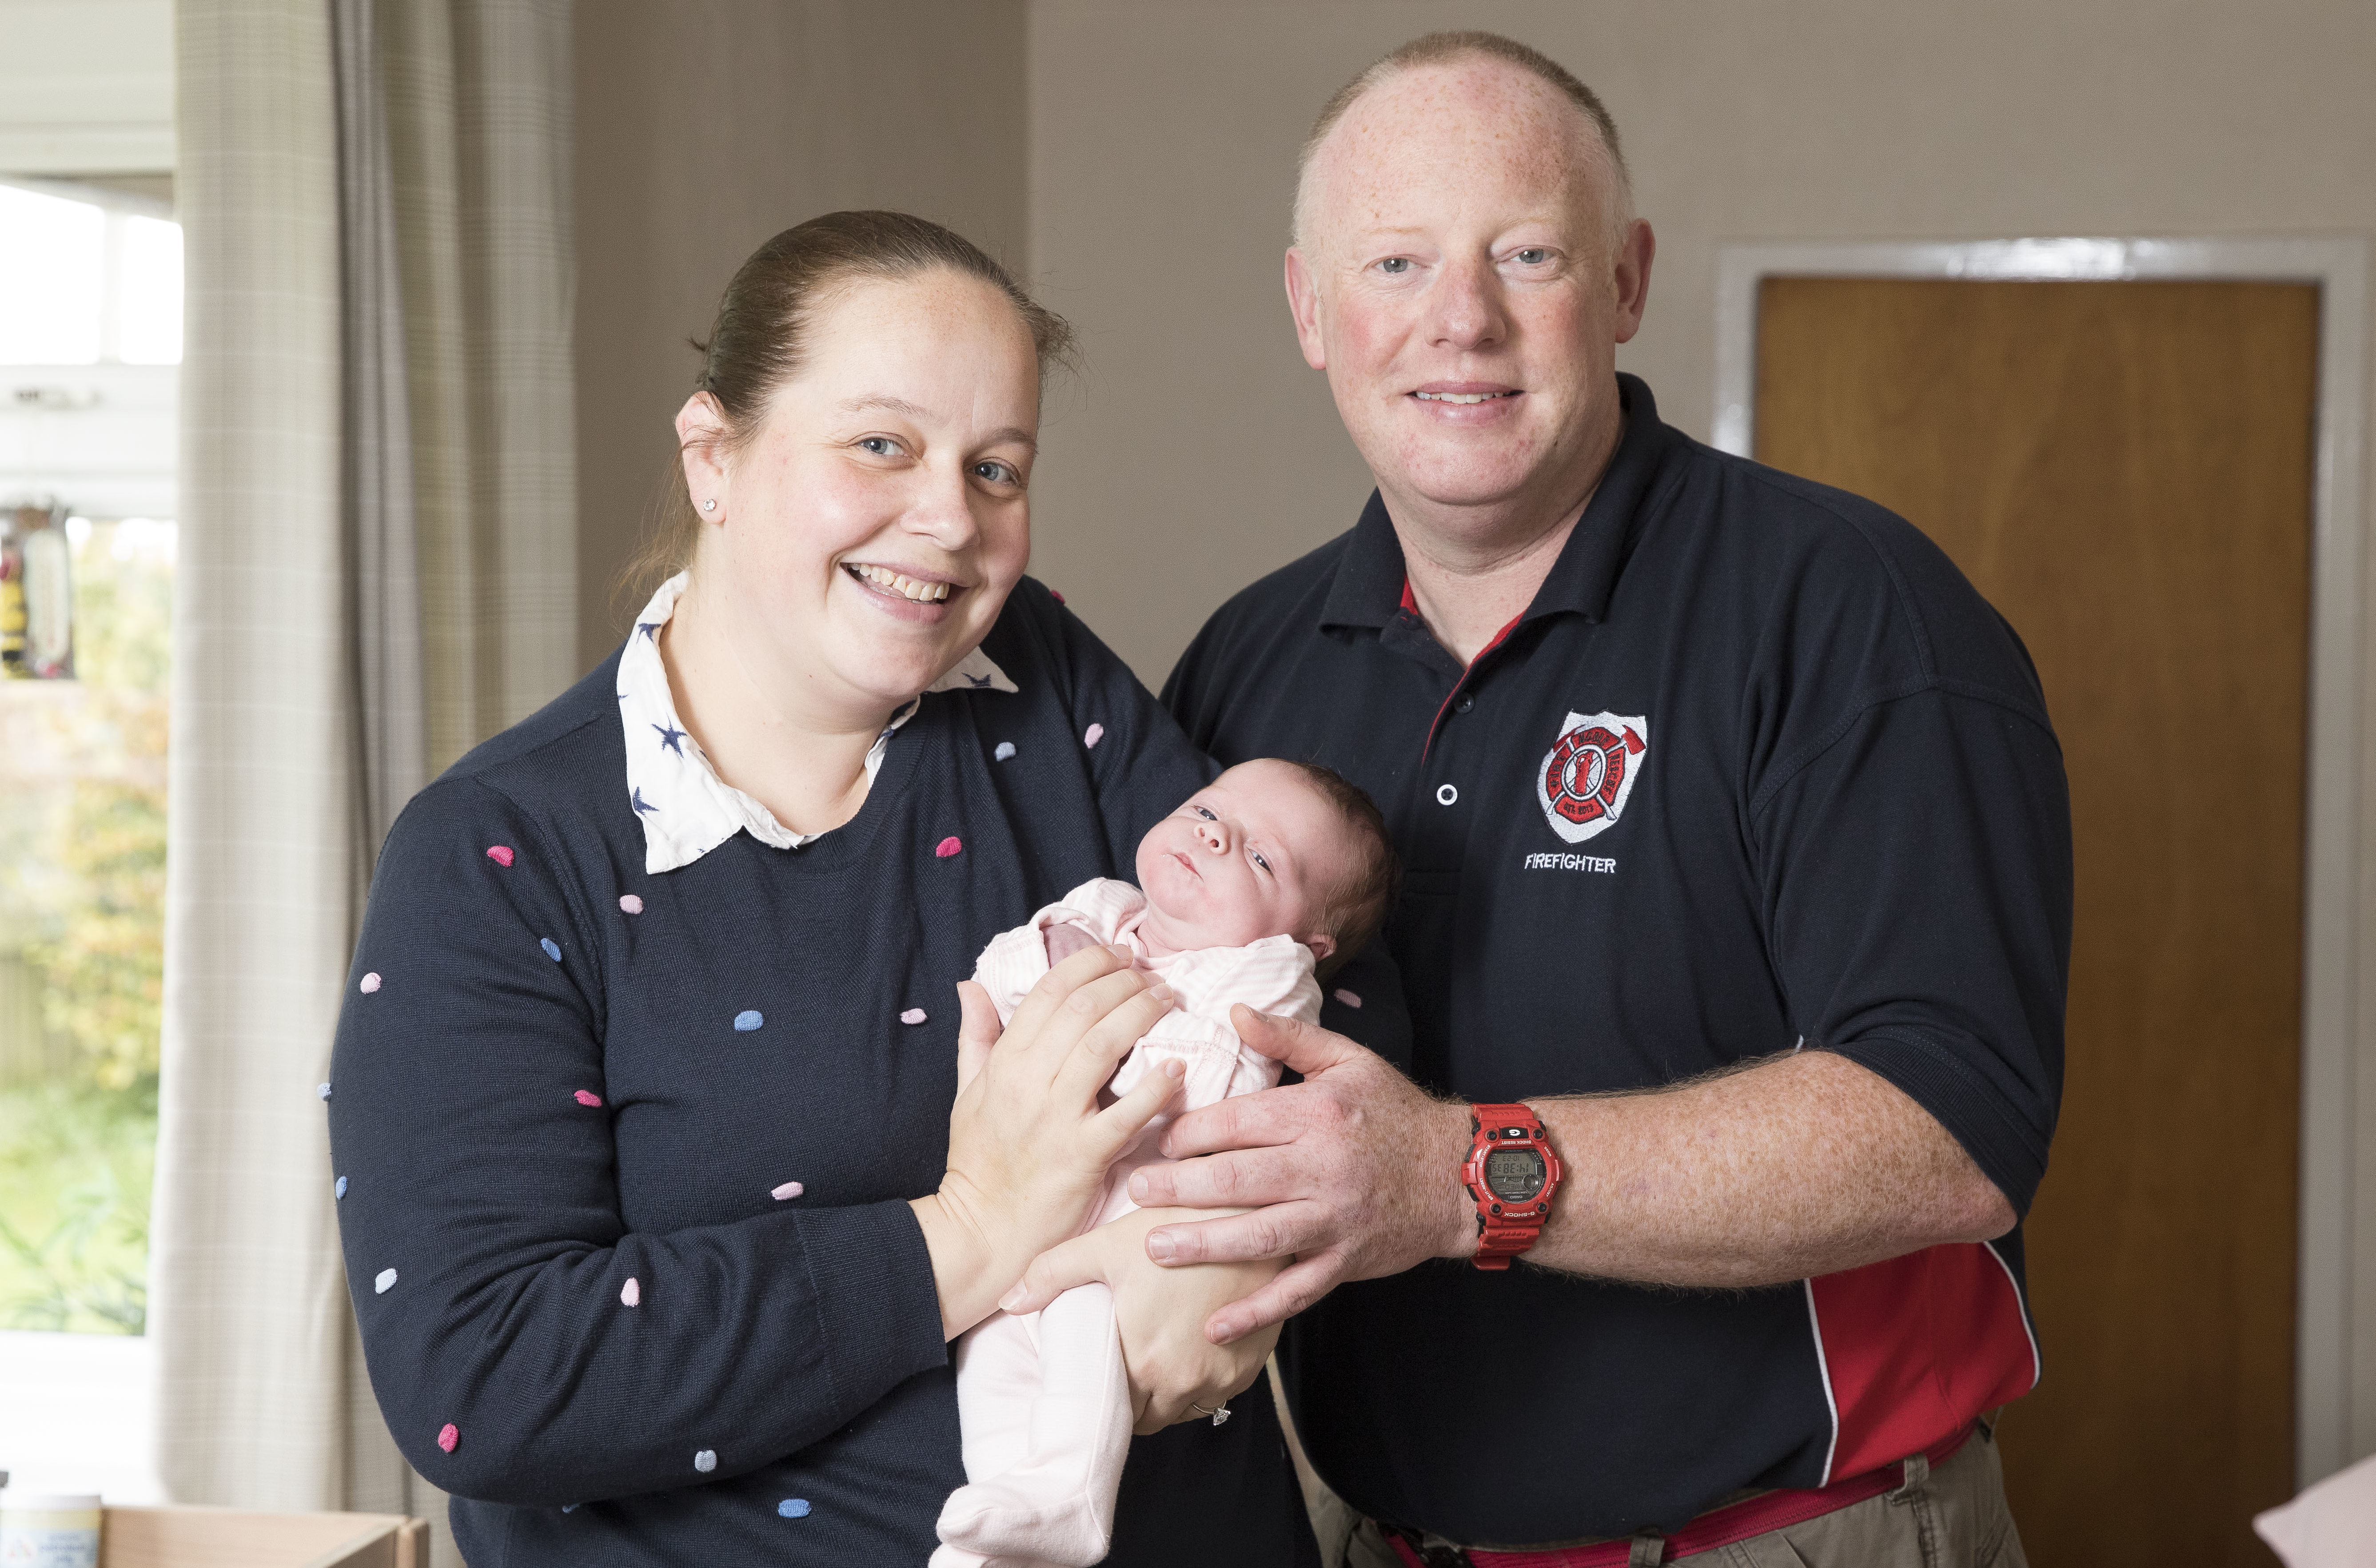 Helen and Paul Noble back home with baby Amber after an unexpected delivery